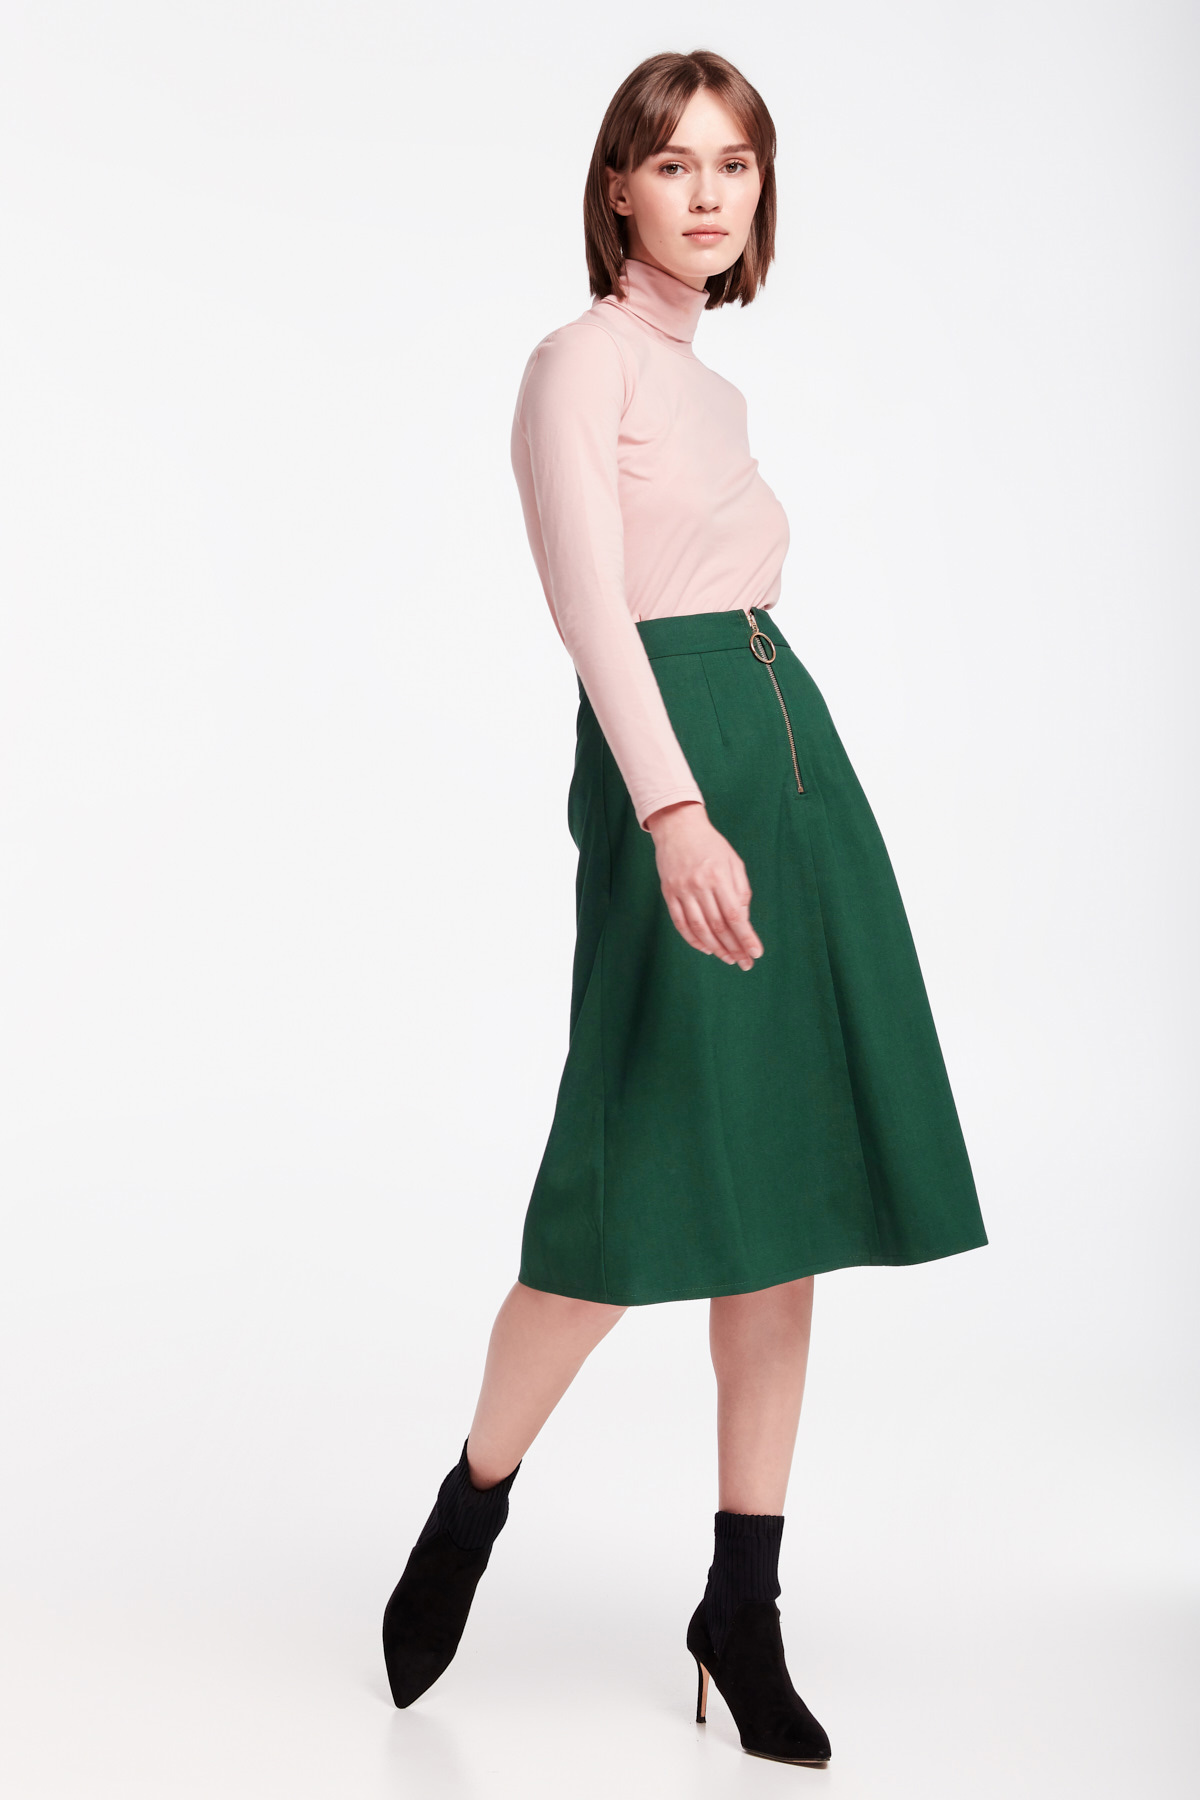 Green midi dress with a front zip, photo 17